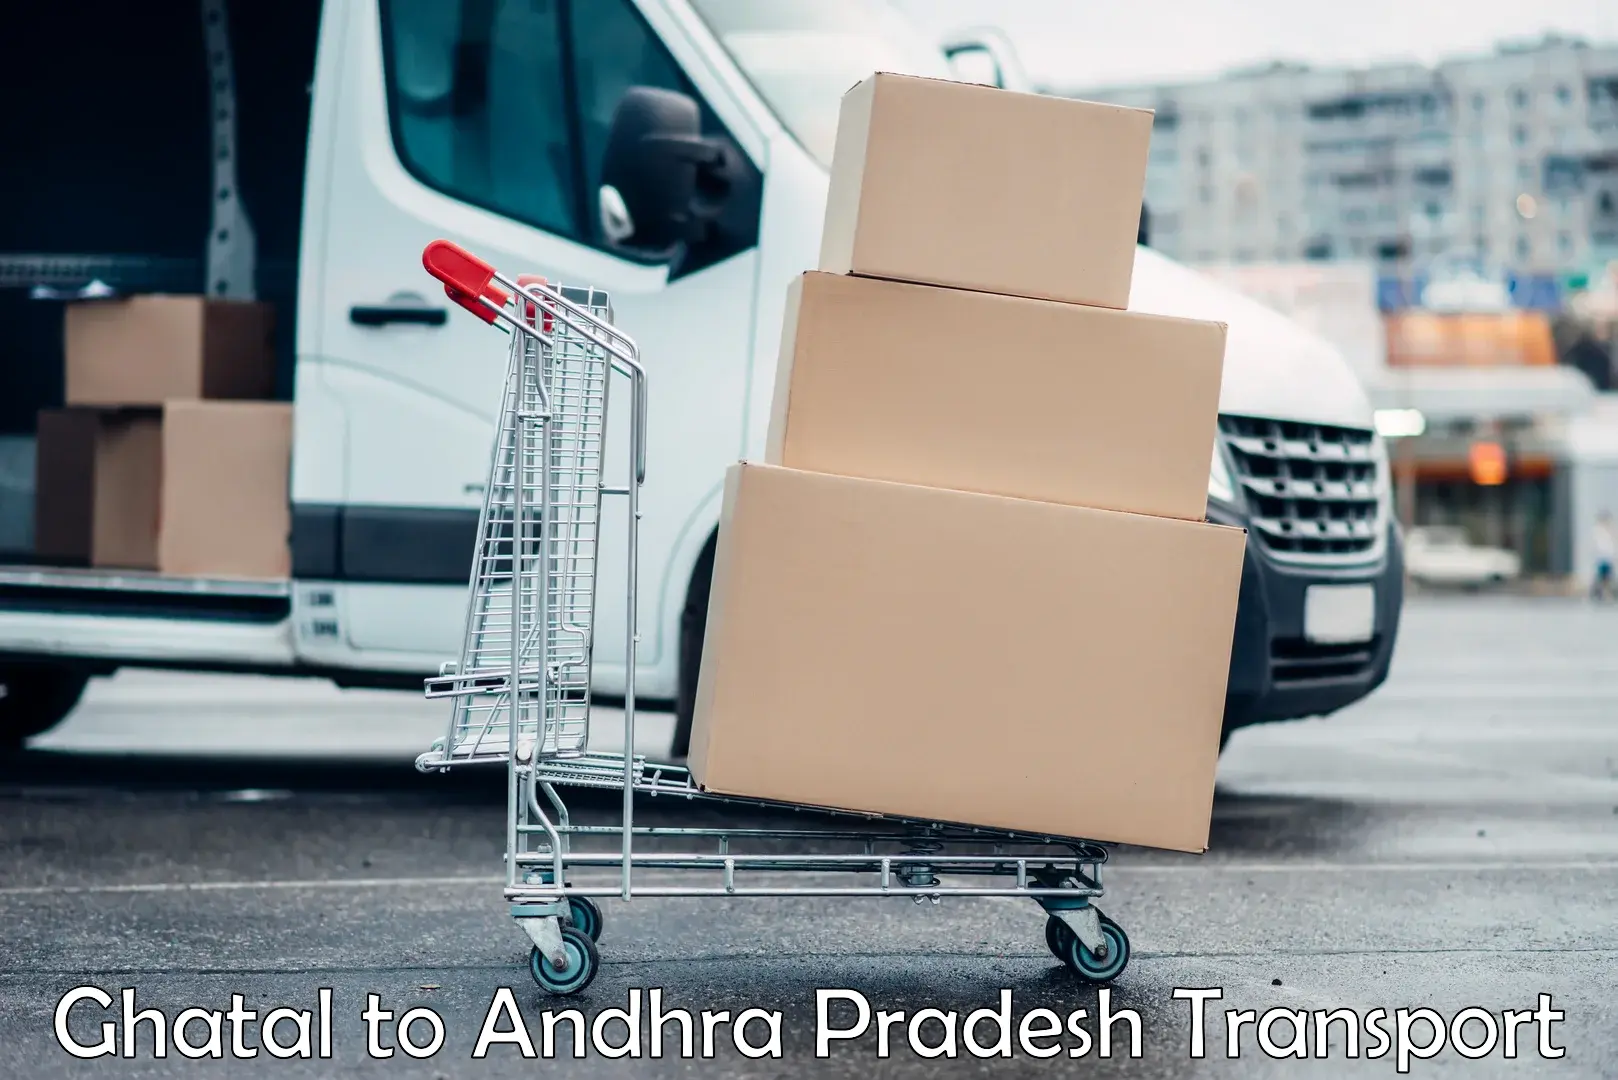 Parcel transport services in Ghatal to Gopalapatnam